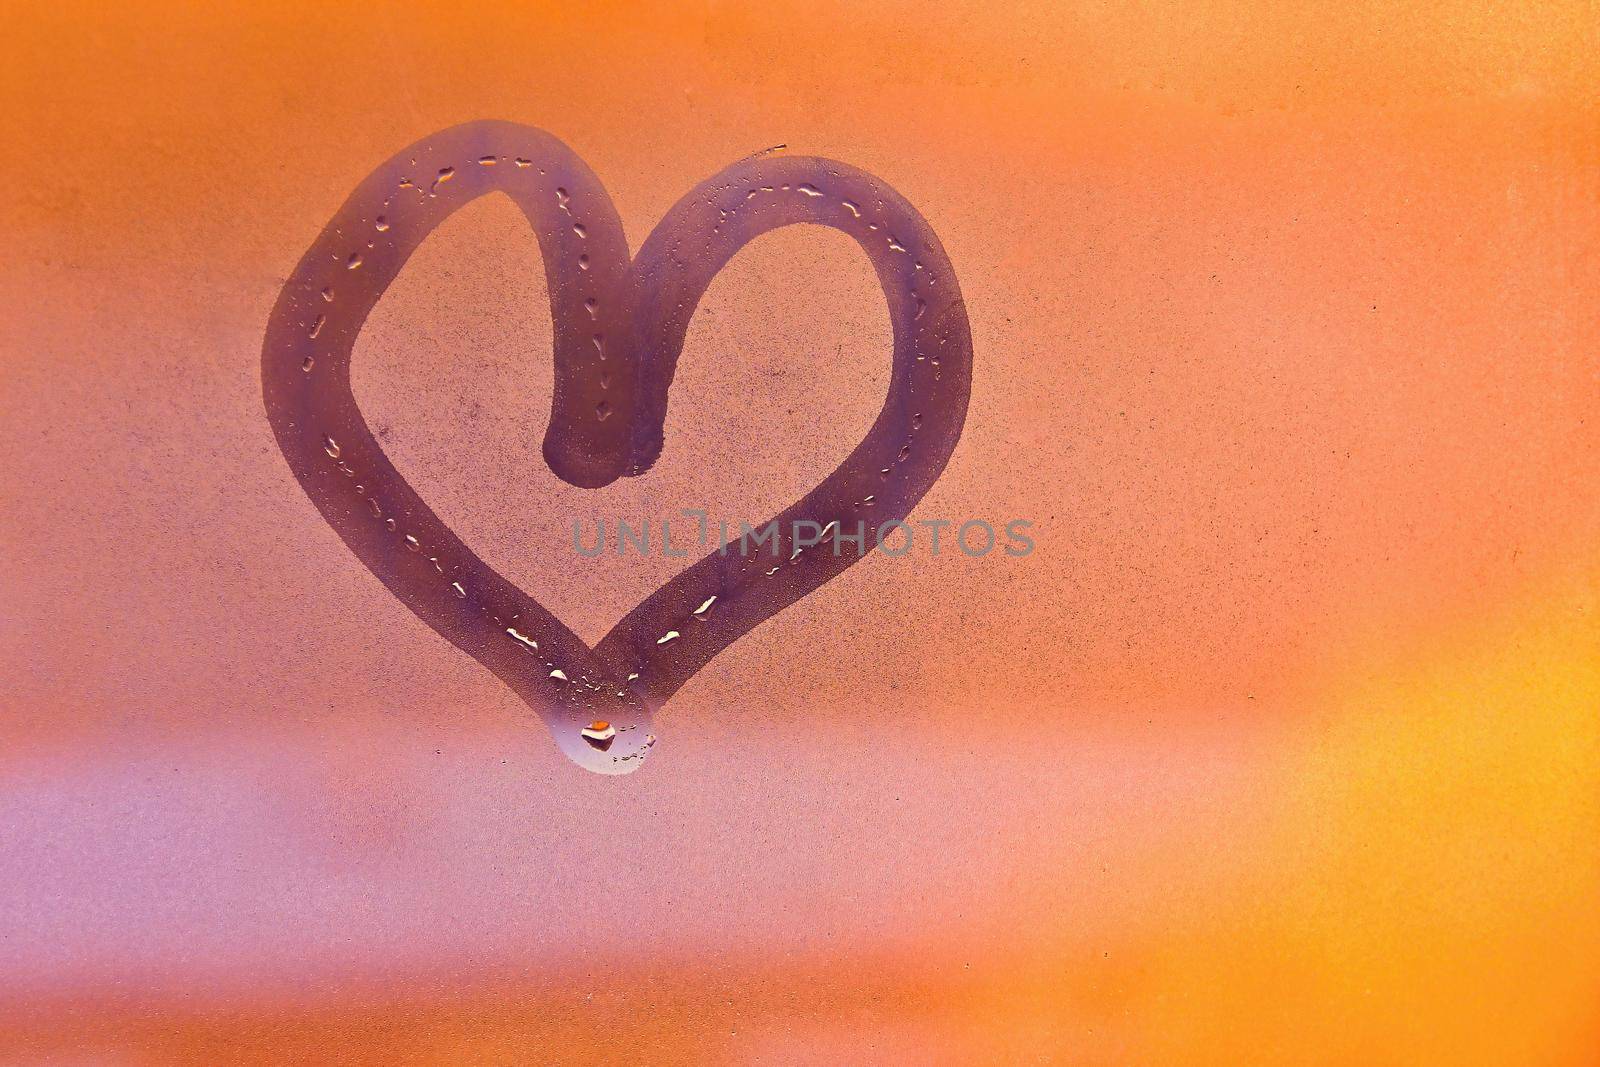 Heart painted with finger on foggy window